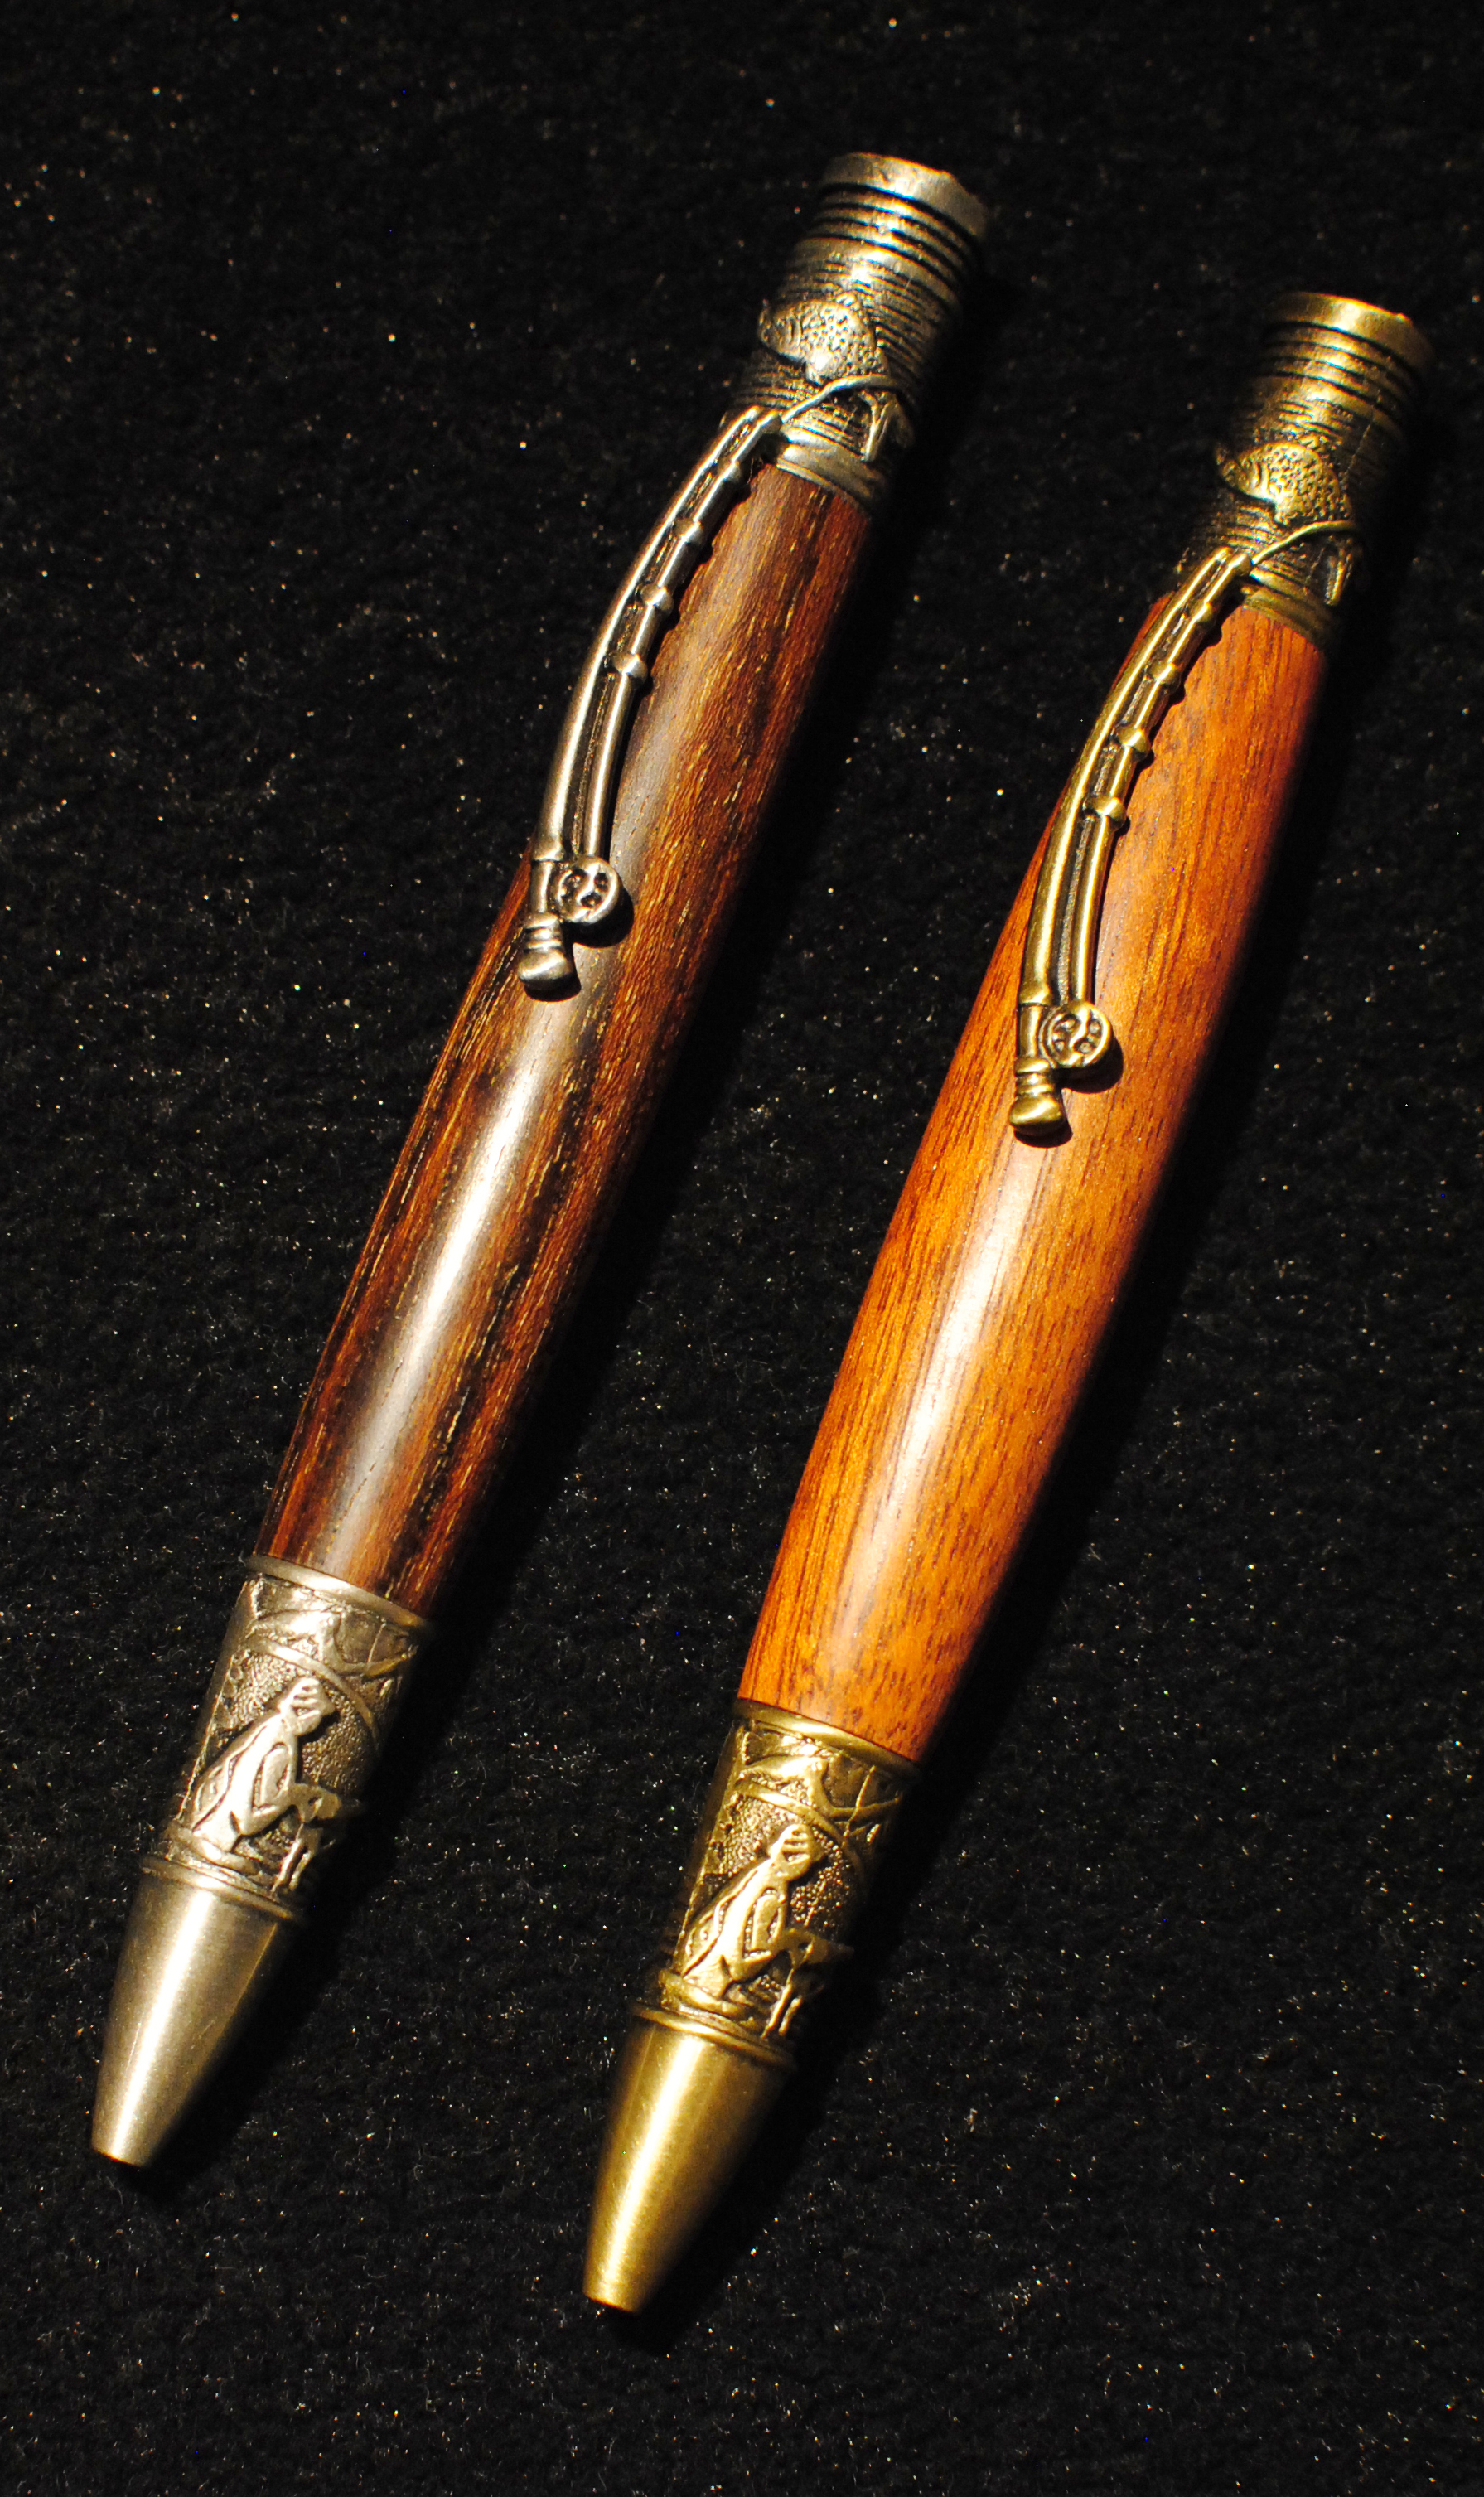 Allywood Creations Fly Fisherman Pen - Wood